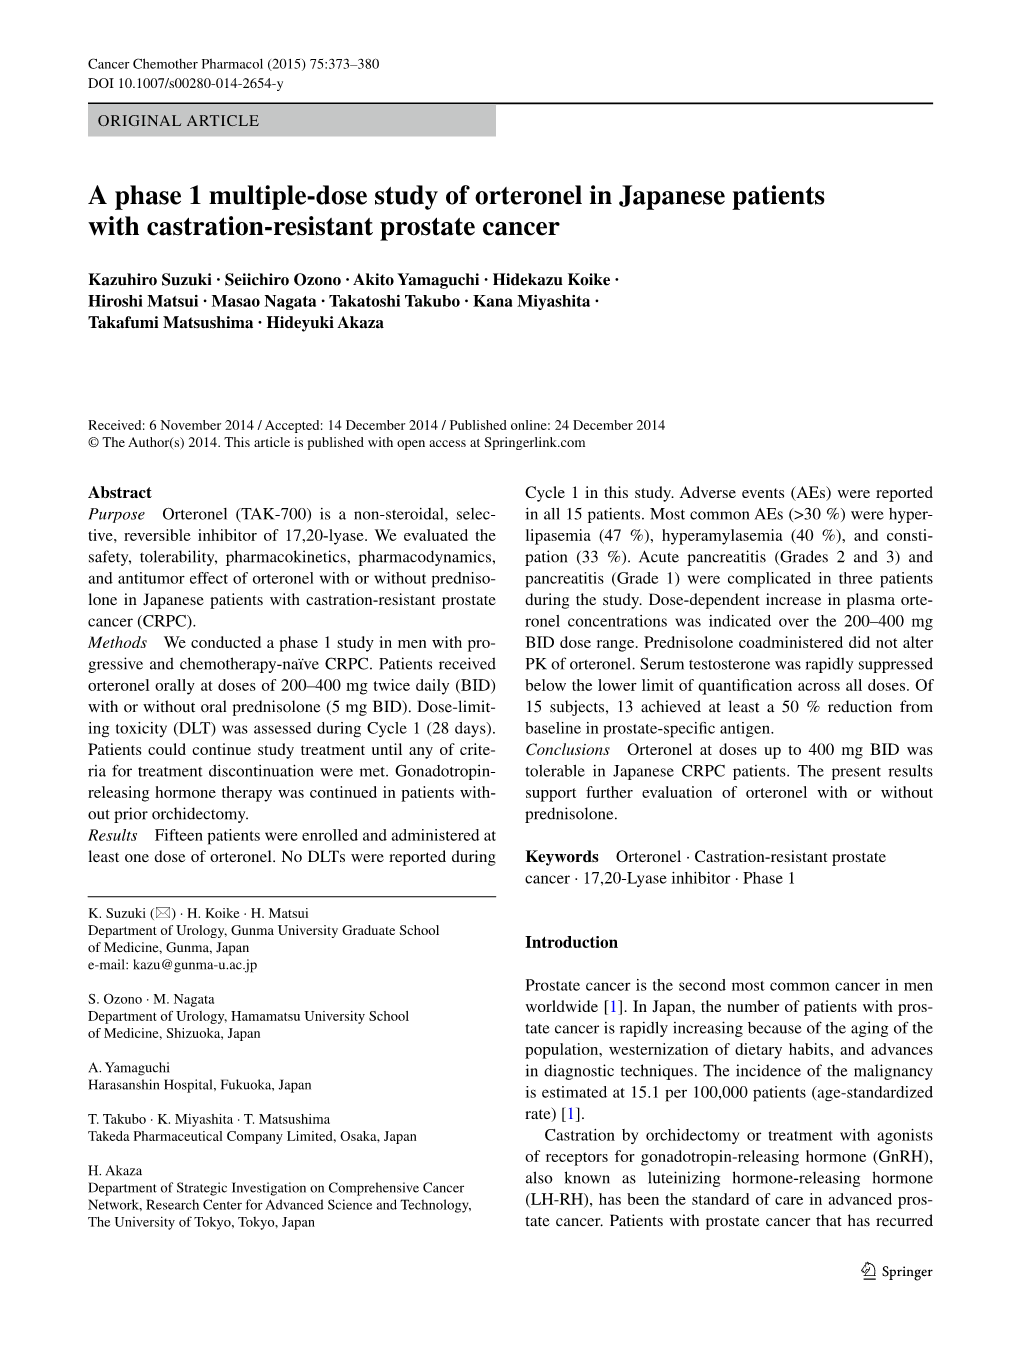 A Phase 1 Multiple-Dose Study of Orteronel in Japanese Patients with Castration-Resistant Prostate Cancer